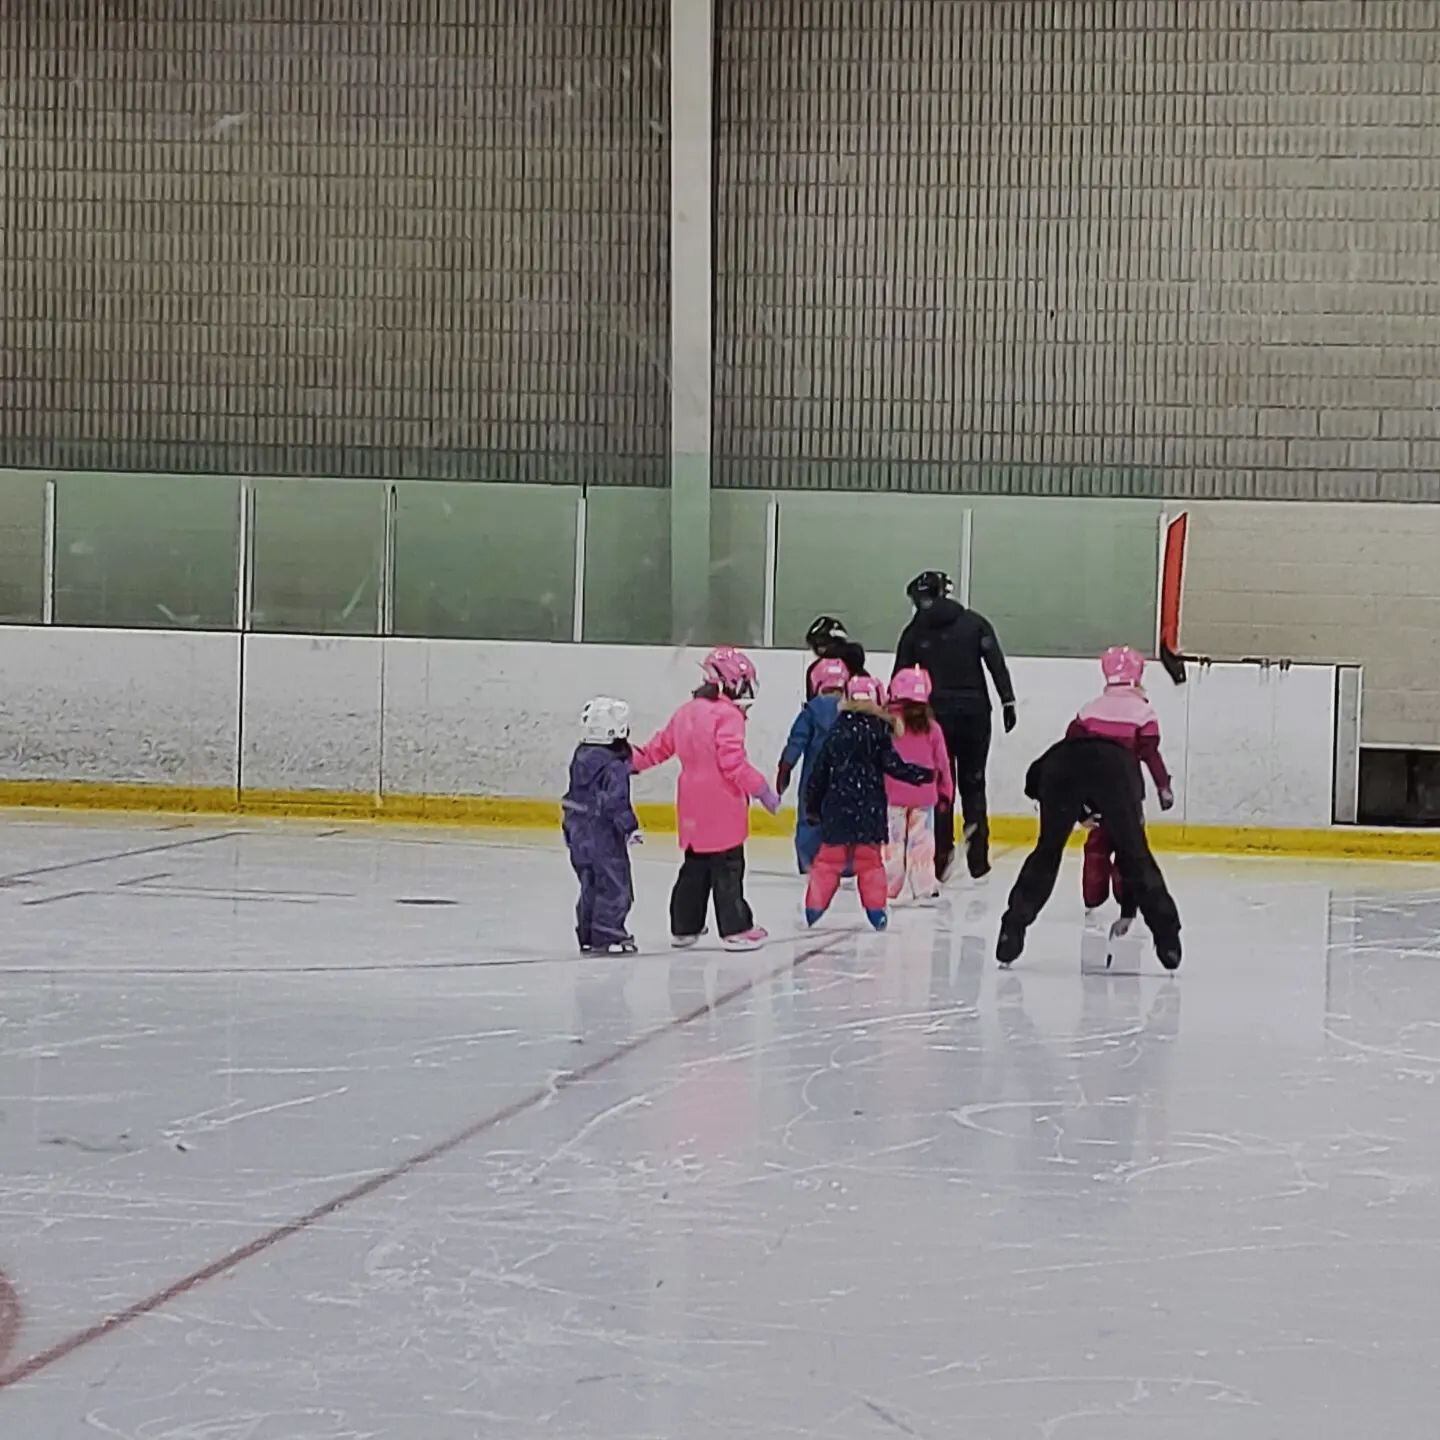 You know those moments when it all kind of hits you unexpectedly? When you realize just how much we've given up these last 2 years?
 
I sat and watched my girls take part in their first skating lesson today and found myself tearing up.
 
Yes, we've b